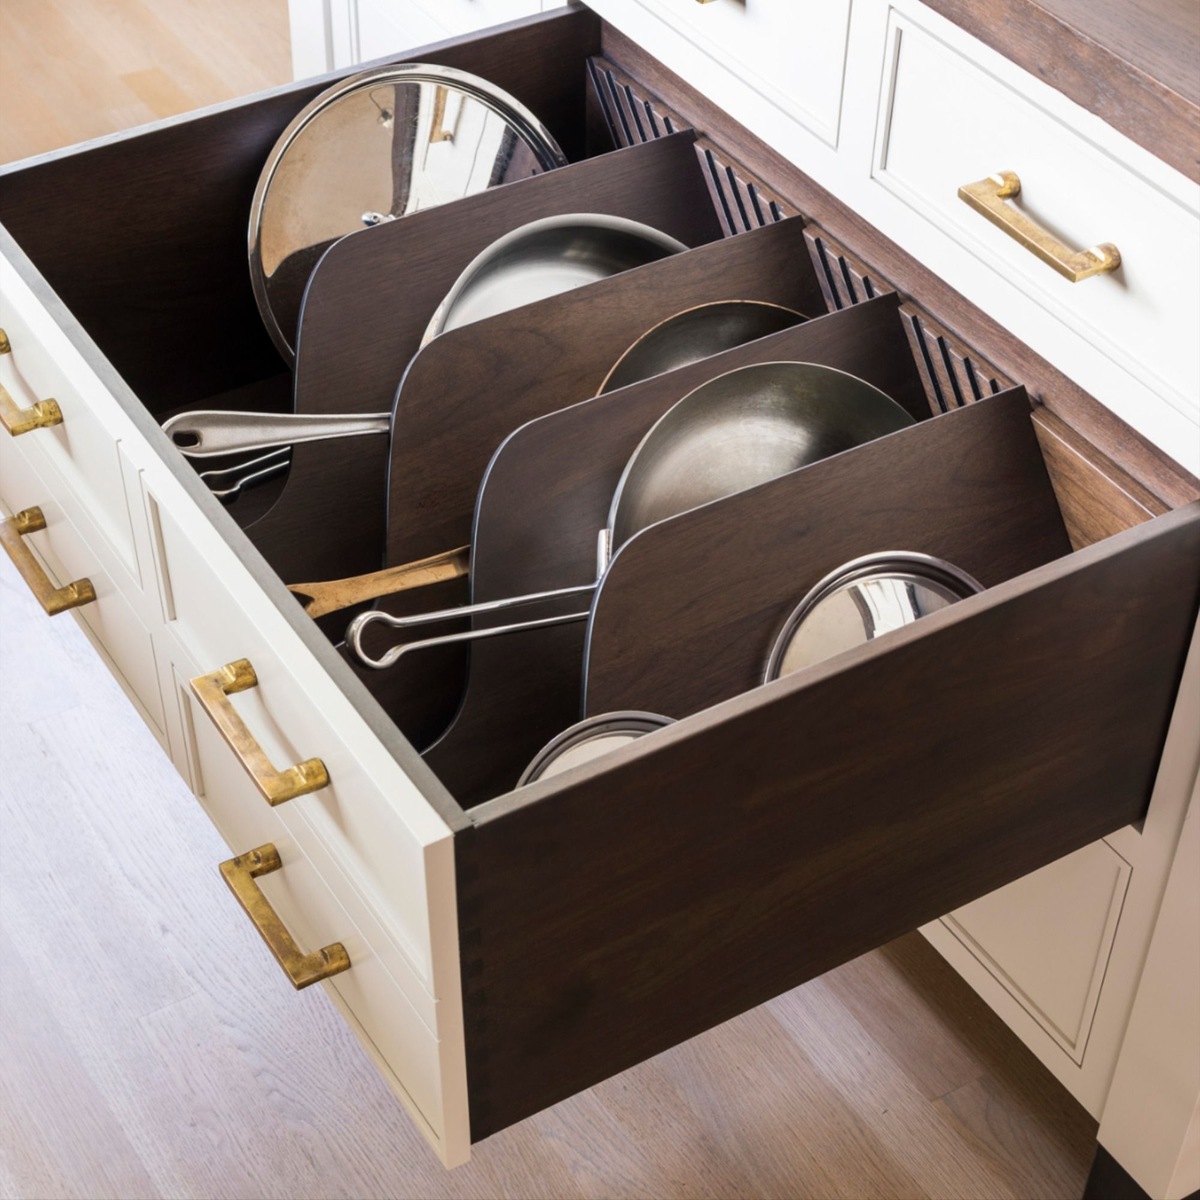 How To Store Pans In Small Kitchen